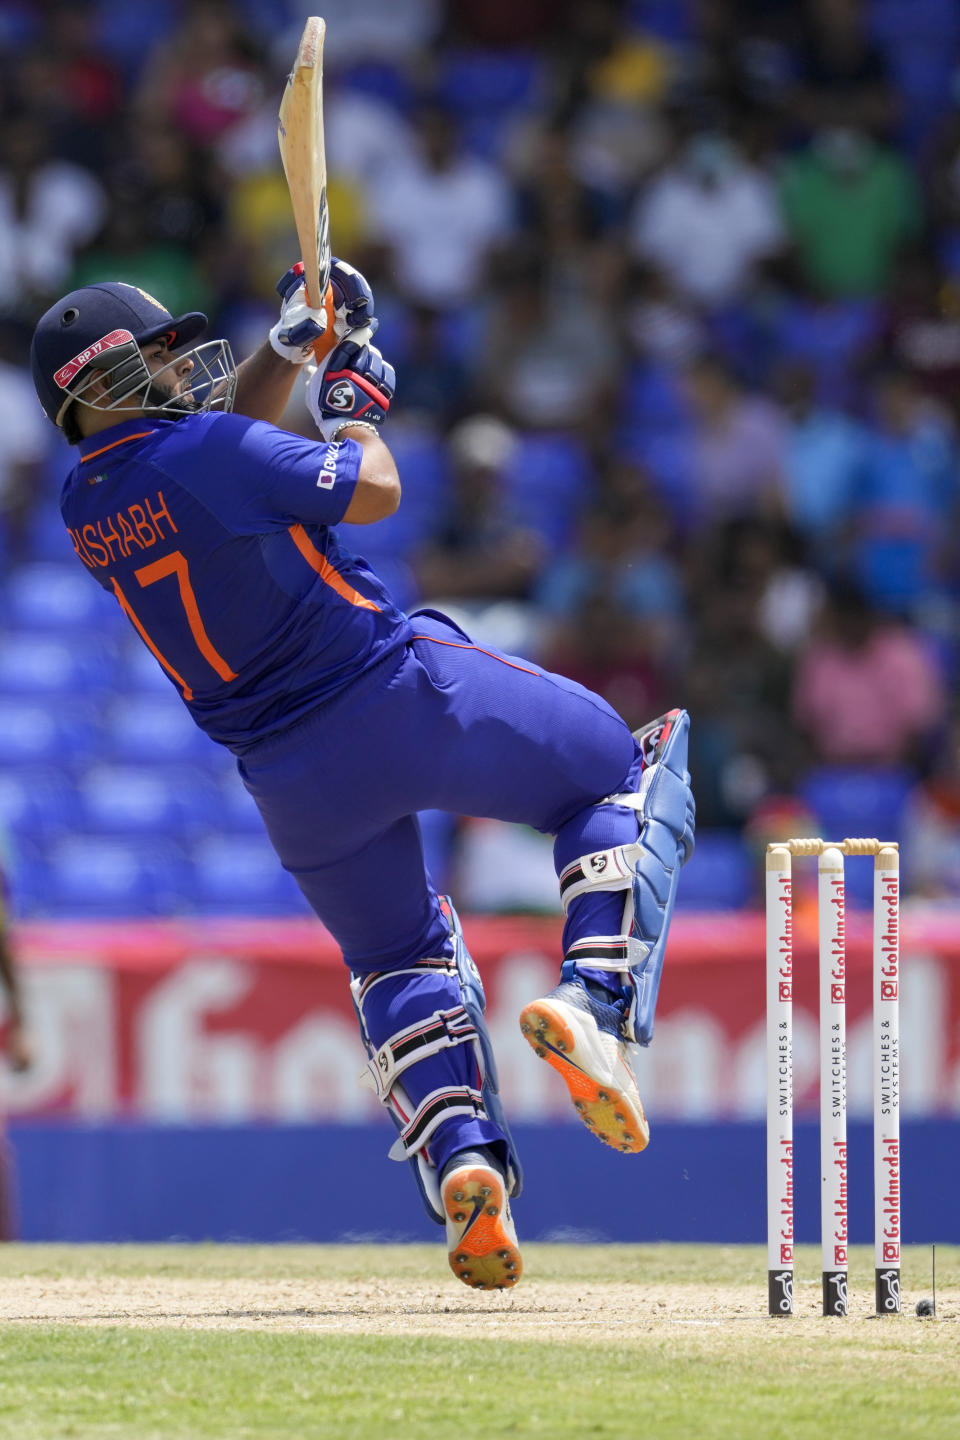 India's Rishabh Pant hits a six against West Indies during the second T20 cricket match at Warner Park in Basseterre, St. Kitts and Nevis, Monday, Aug. 1, 2022. (AP Photo/Ricardo Mazalan)